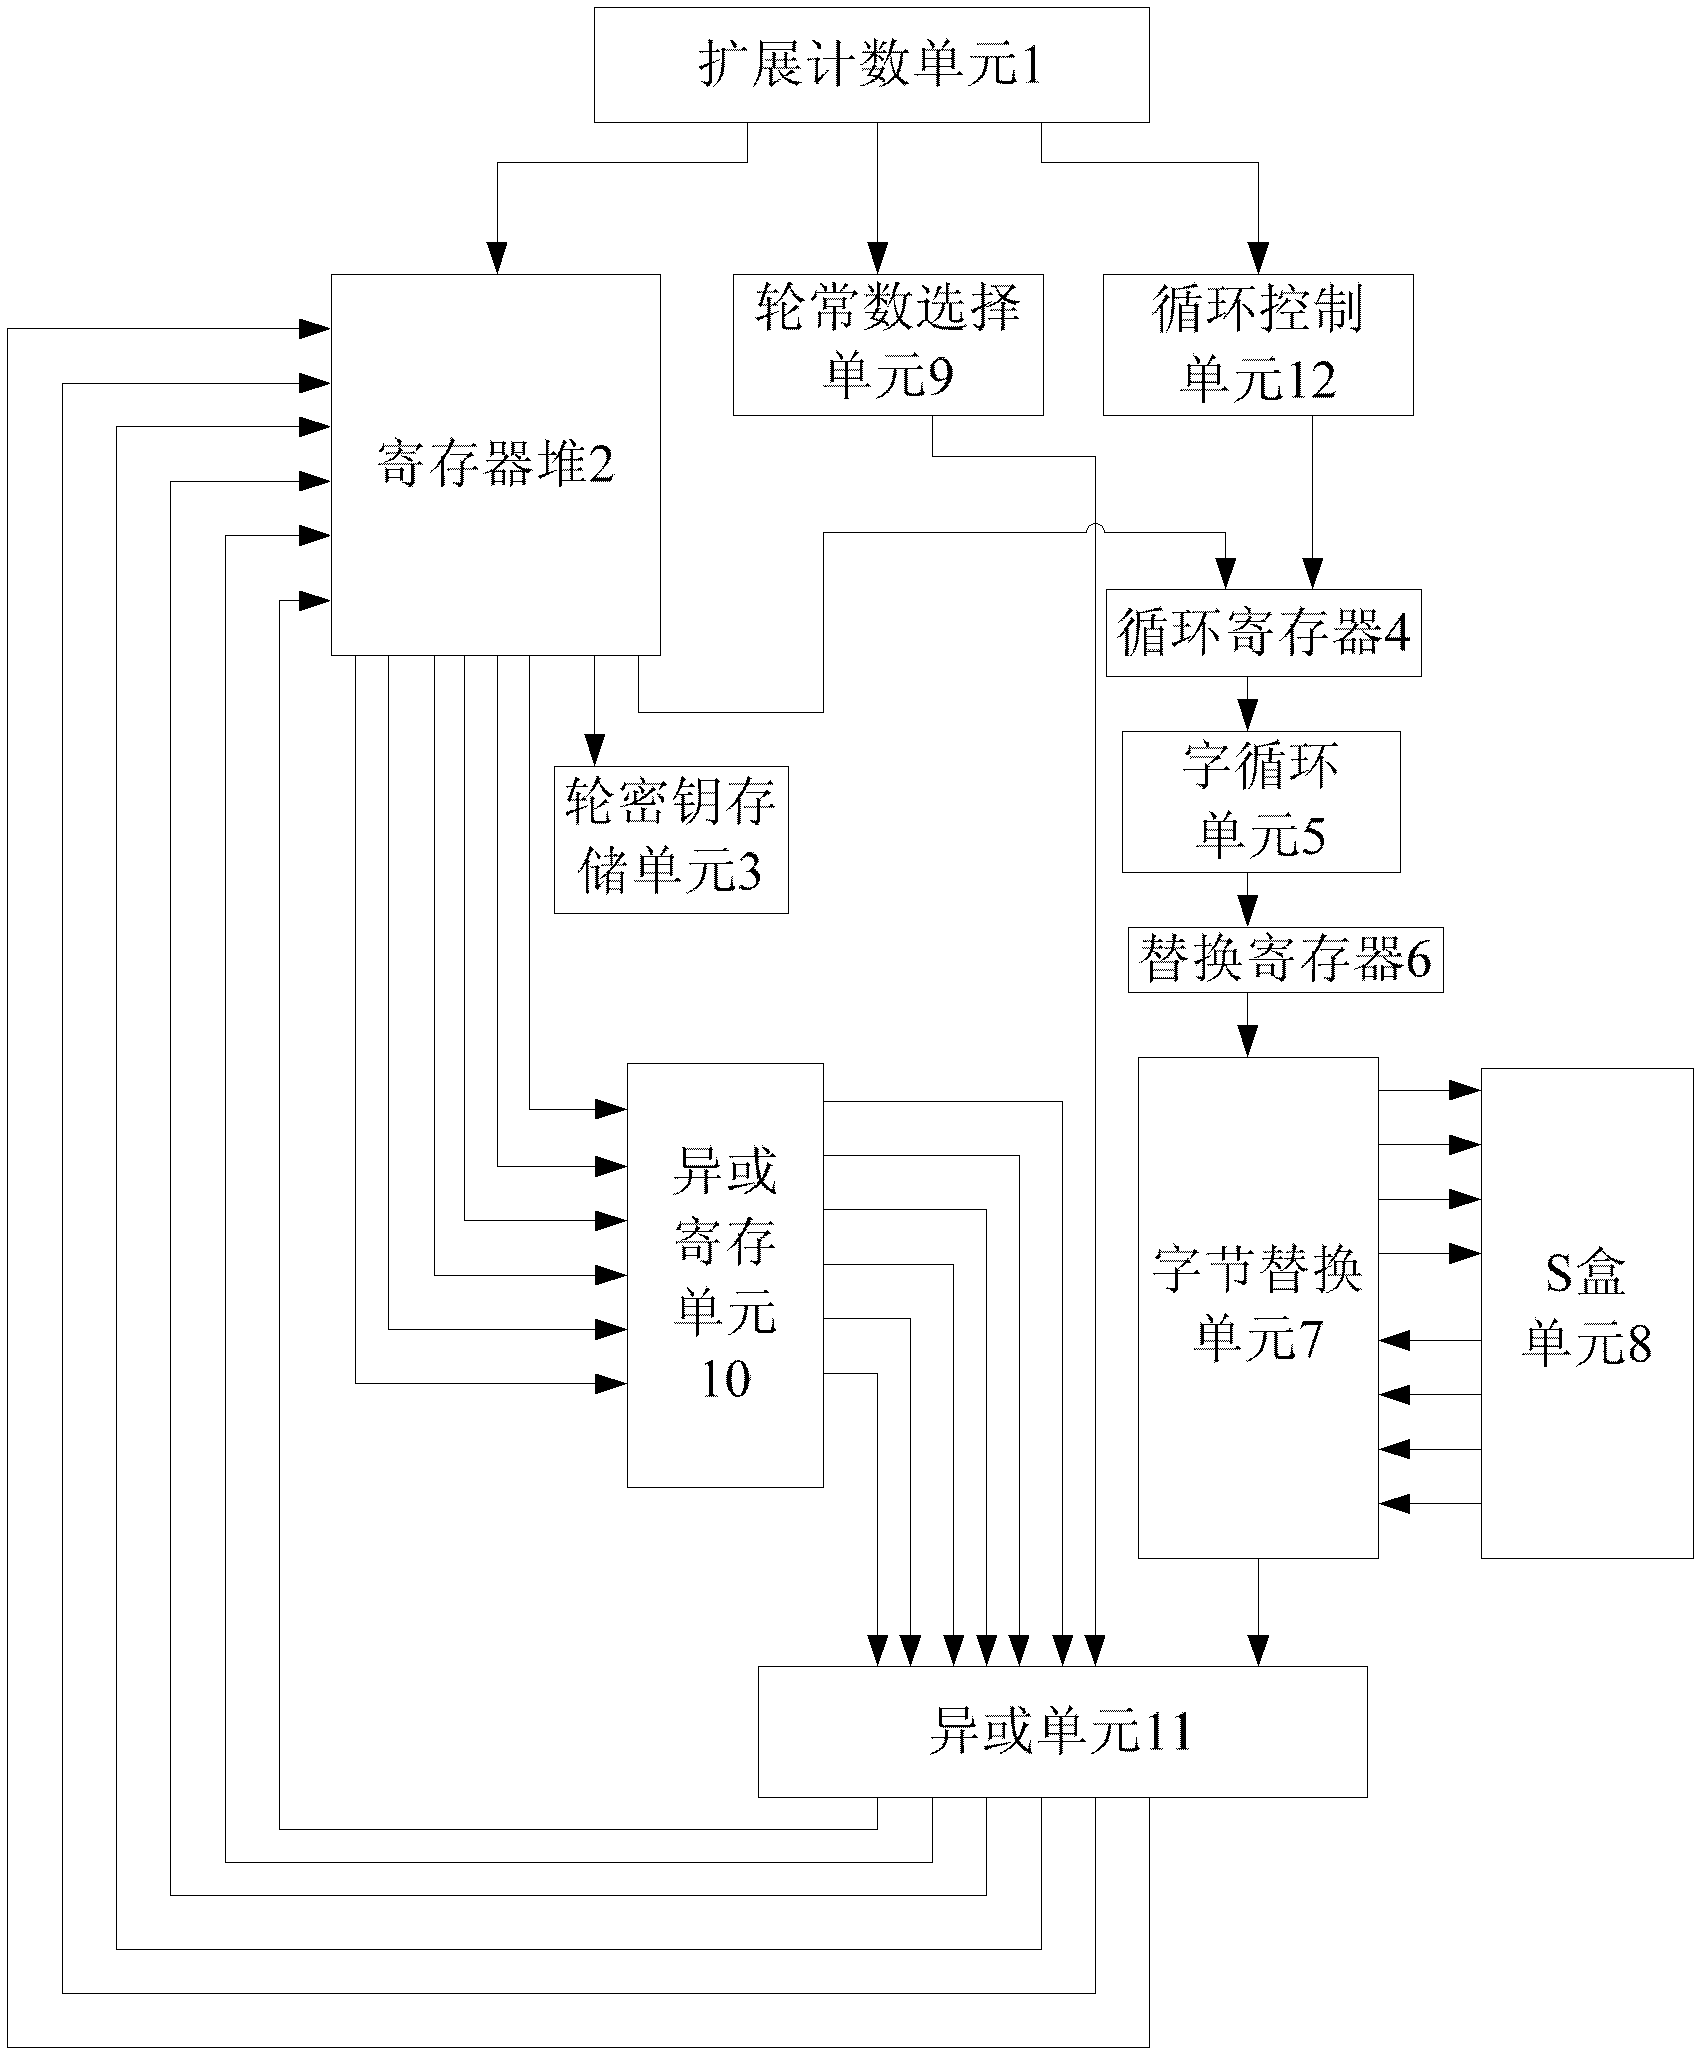 192 bit key expansion system and method based on AES (advanced encryption standard)